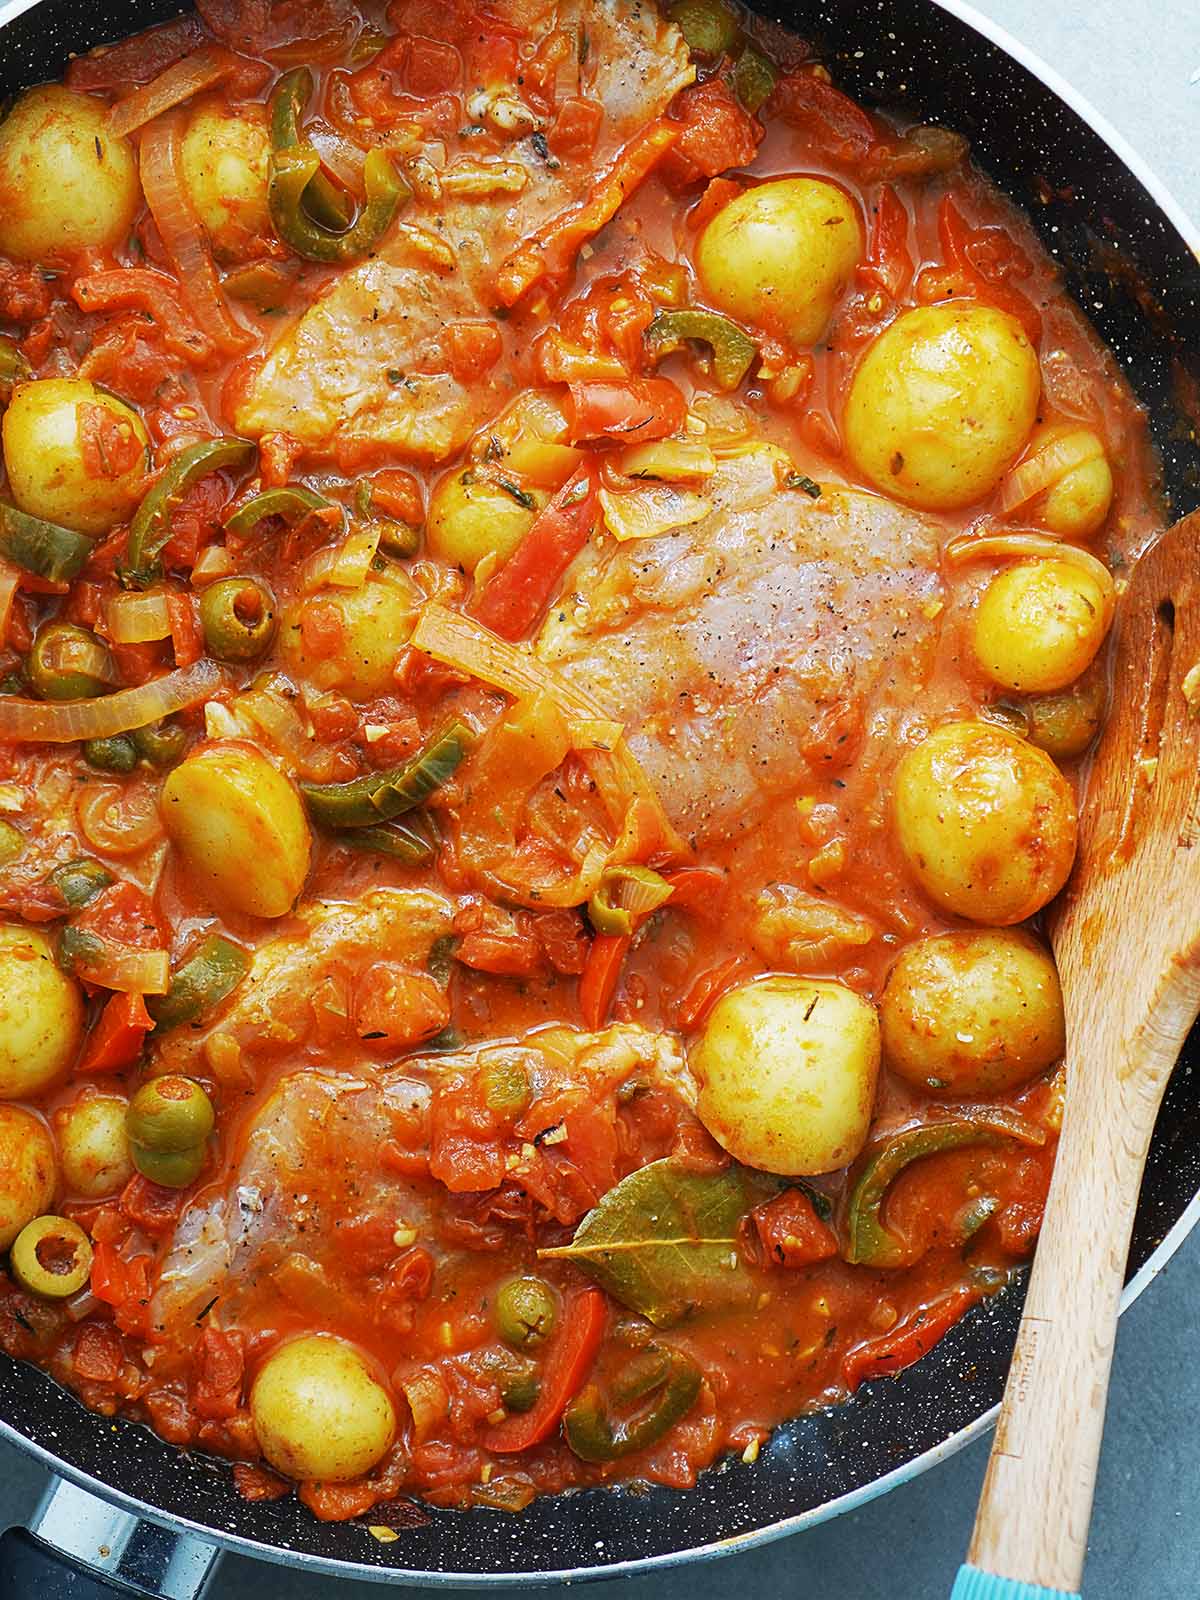 A large skillet with raw fish in the tomato sauce, onions, peppers and potatoes.